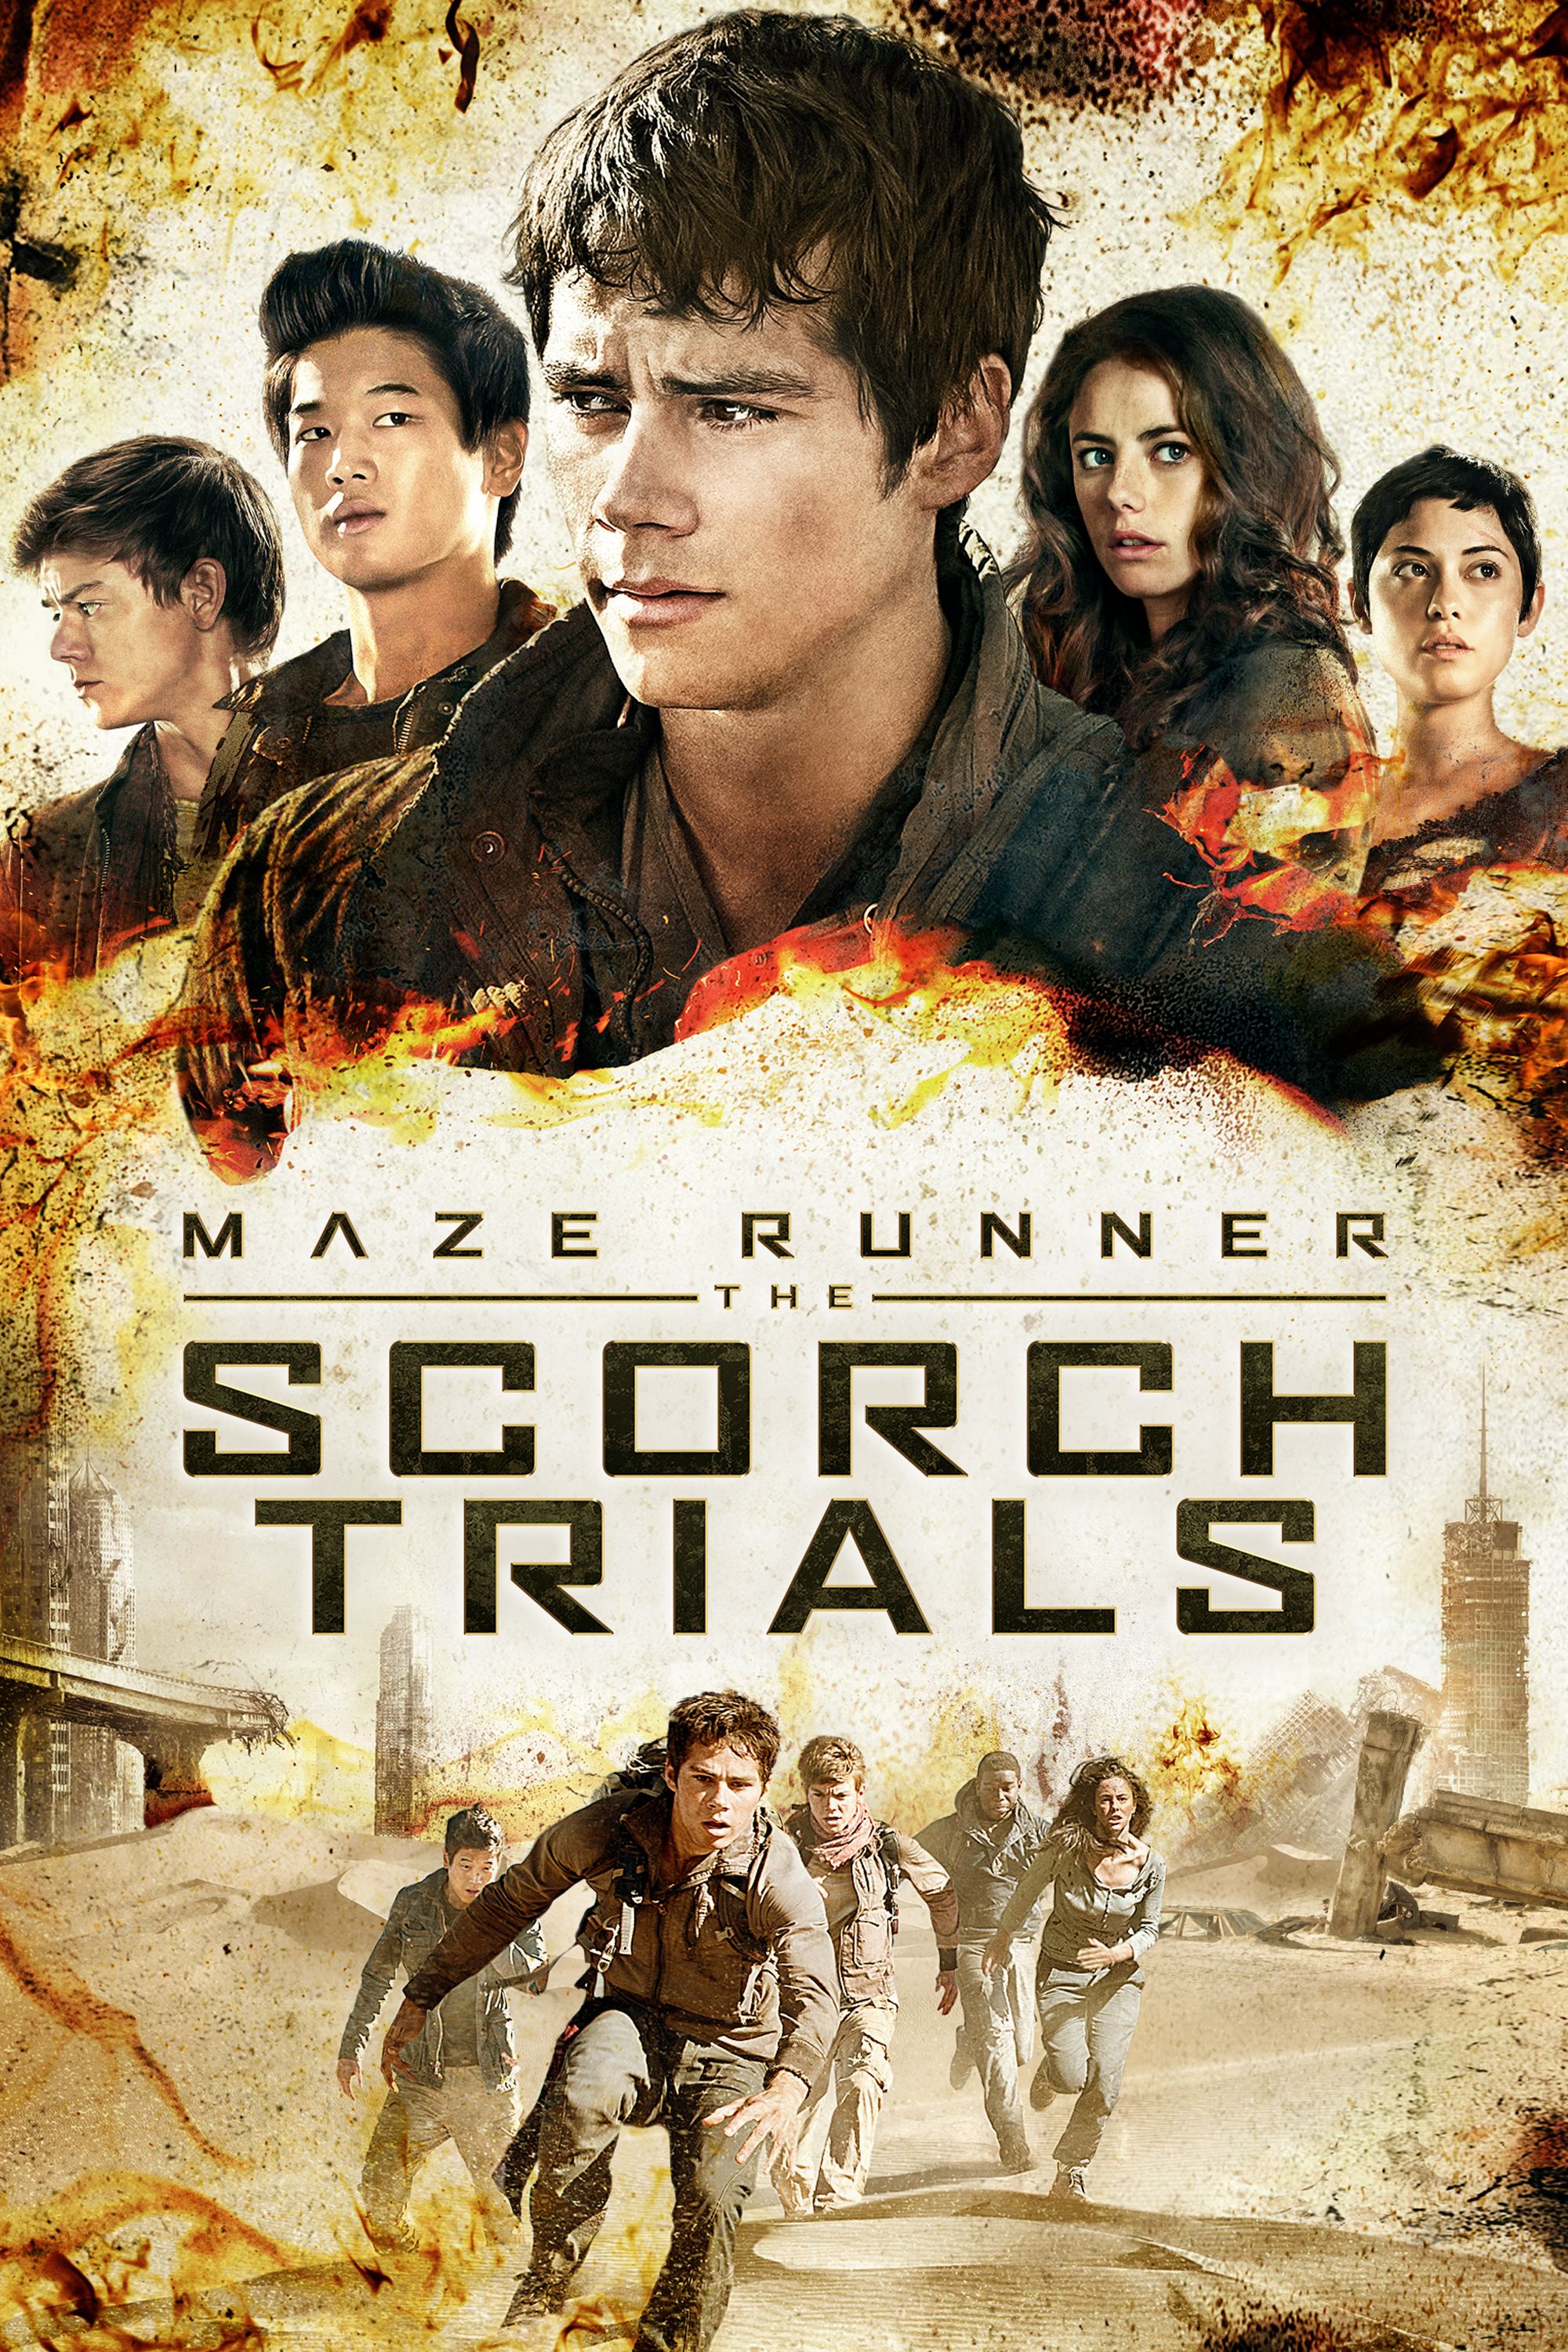 the maze runner full movie in hindi hd free download